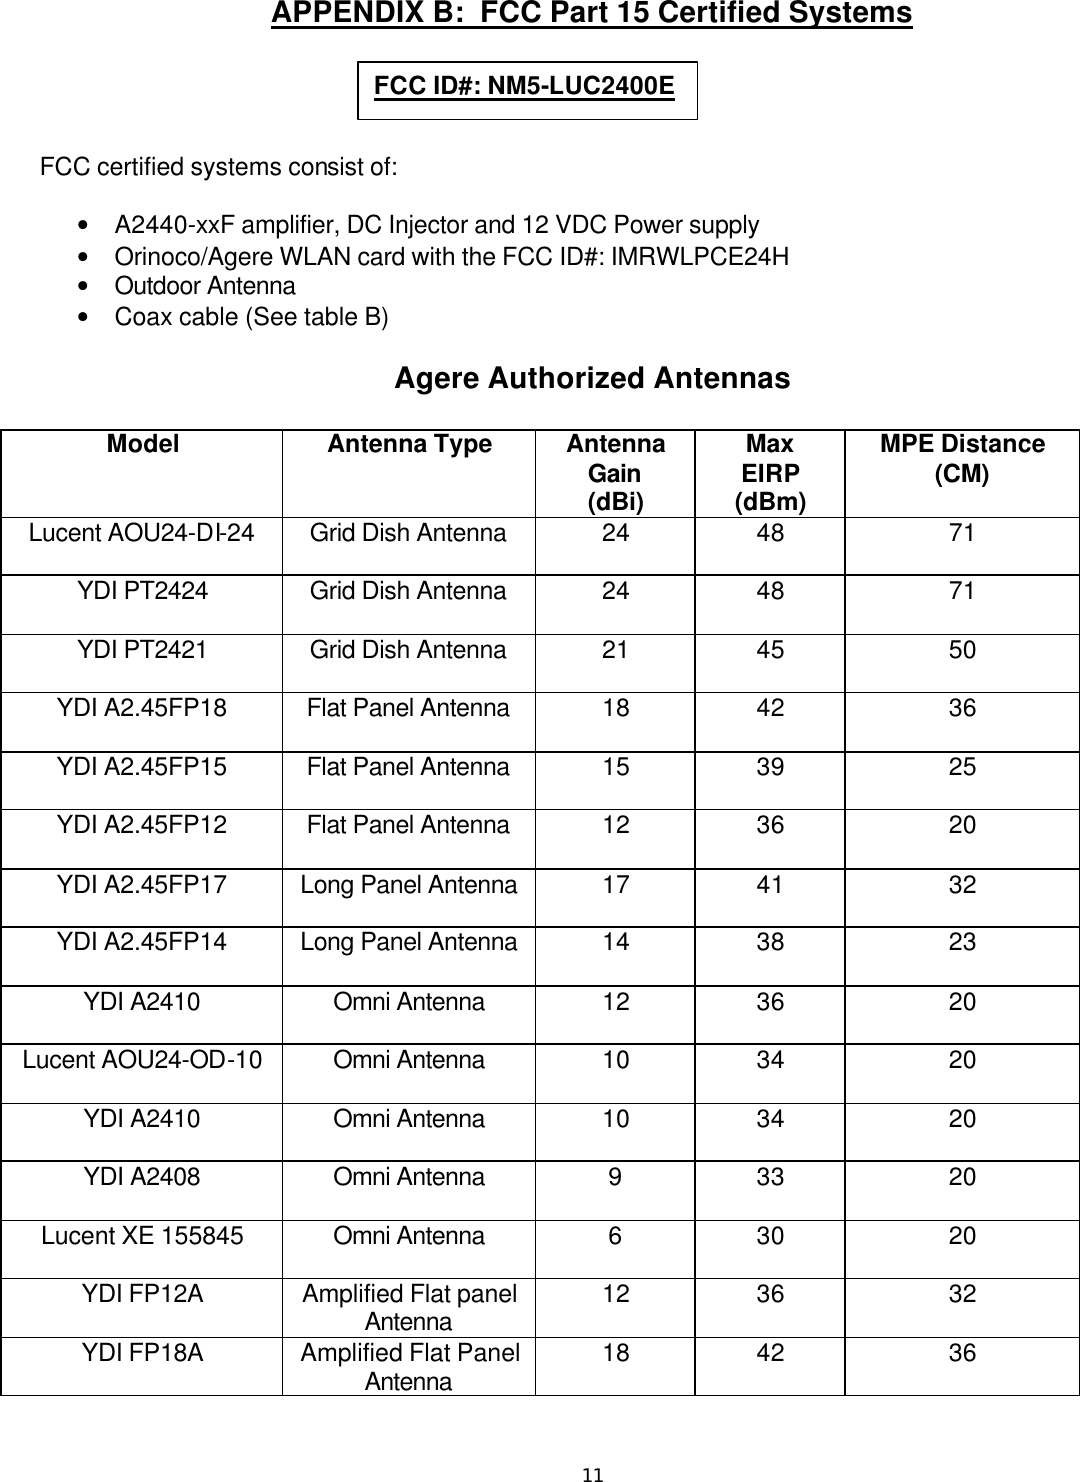  11  APPENDIX B:  FCC Part 15 Certified Systems     FCC certified systems consist of:  • A2440-xxF amplifier, DC Injector and 12 VDC Power supply • Orinoco/Agere WLAN card with the FCC ID#: IMRWLPCE24H • Outdoor Antenna • Coax cable (See table B)  Agere Authorized Antennas  Model Antenna Type Antenna Gain (dBi) Max EIRP (dBm) MPE Distance (CM) Lucent AOU24-DI-24  Grid Dish Antenna 24 48 71 YDI PT2424  Grid Dish Antenna 24 48 71 YDI PT2421  Grid Dish Antenna 21 45 50 YDI A2.45FP18  Flat Panel Antenna 18 42 36 YDI A2.45FP15  Flat Panel Antenna 15 39 25 YDI A2.45FP12  Flat Panel Antenna 12 36 20 YDI A2.45FP17  Long Panel Antenna 17 41 32 YDI A2.45FP14  Long Panel Antenna 14 38 23 YDI A2410  Omni Antenna 12 36 20 Lucent AOU24-OD-10  Omni Antenna 10 34 20 YDI A2410  Omni Antenna 10 34 20 YDI A2408  Omni Antenna 9 33 20 Lucent XE 155845  Omni Antenna 6 30 20 YDI FP12A Amplified Flat panel Antenna 12 36 32 YDI FP18A Amplified Flat Panel Antenna 18 42 36 FCC ID#: NM5-LUC2400E 